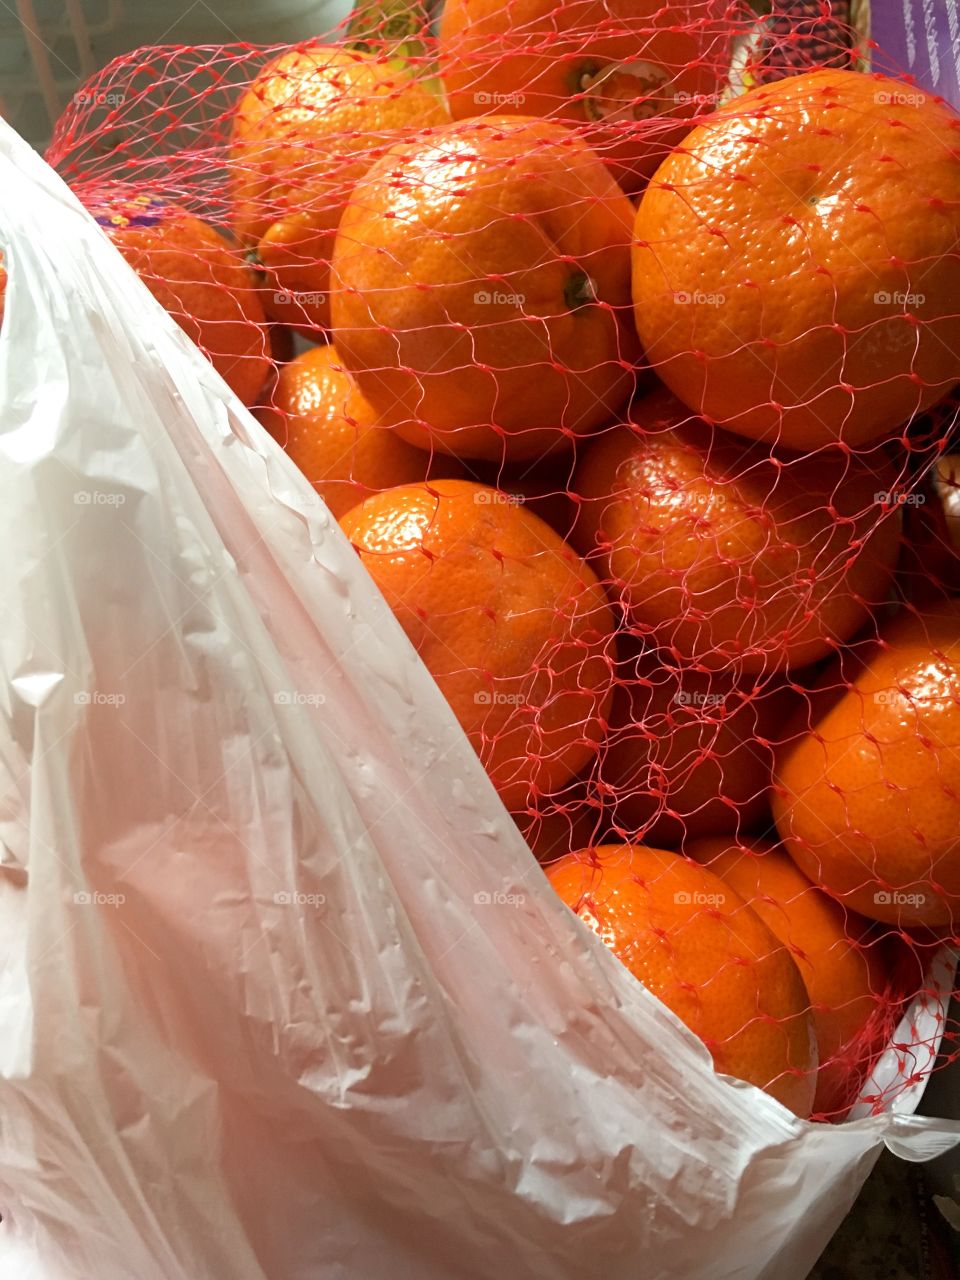 Oranges in a recyclable bag. 